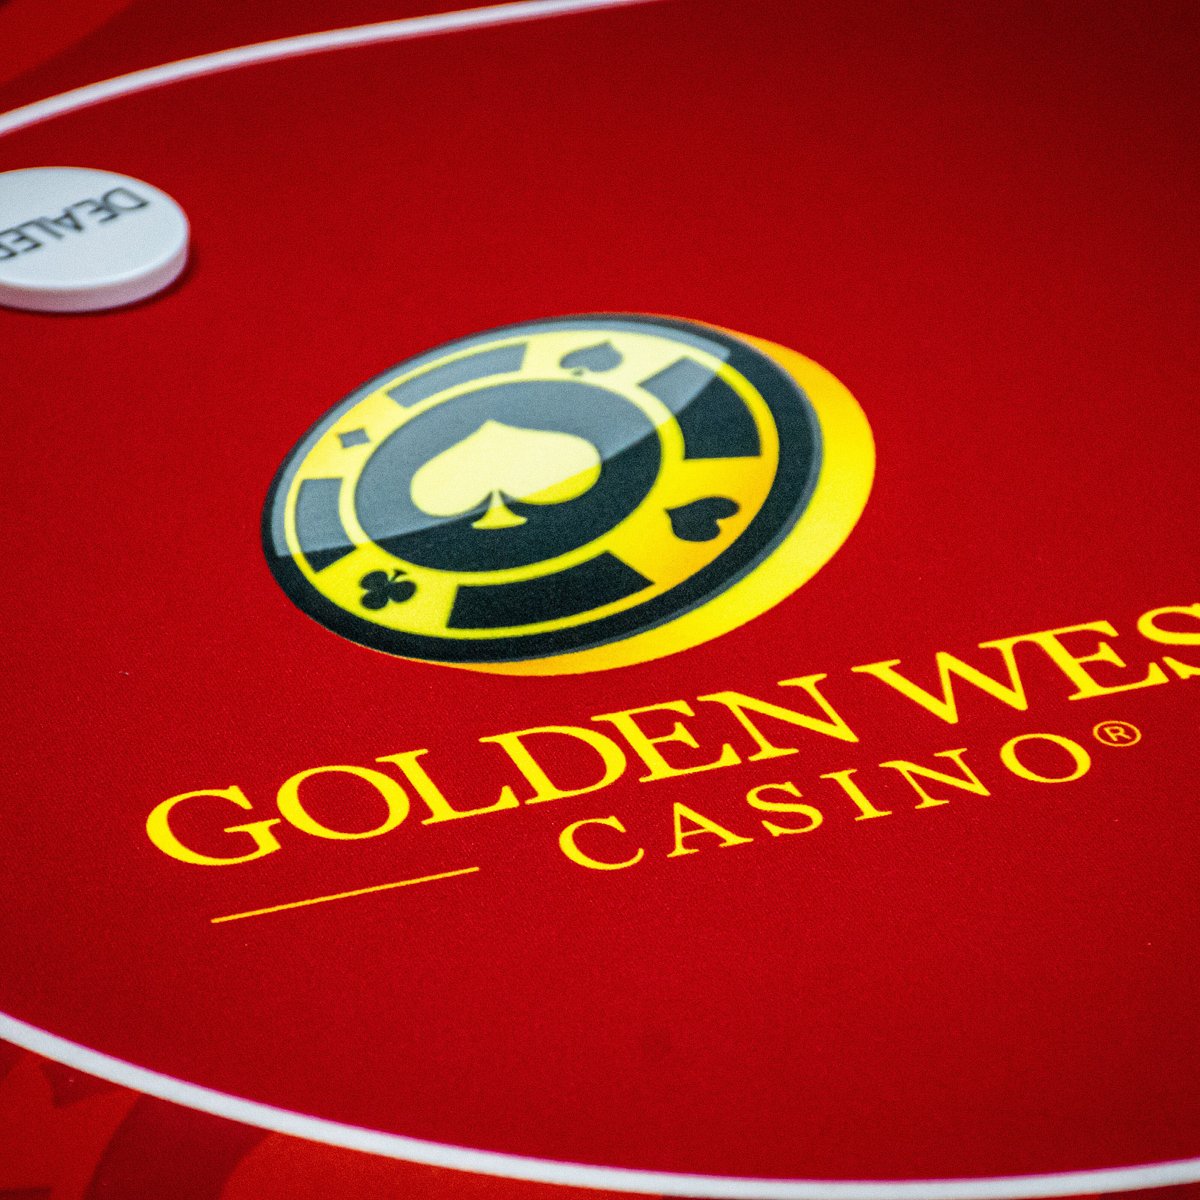 Golden West Casino - Bakerfield's Place To Play Table Games, Poker and more